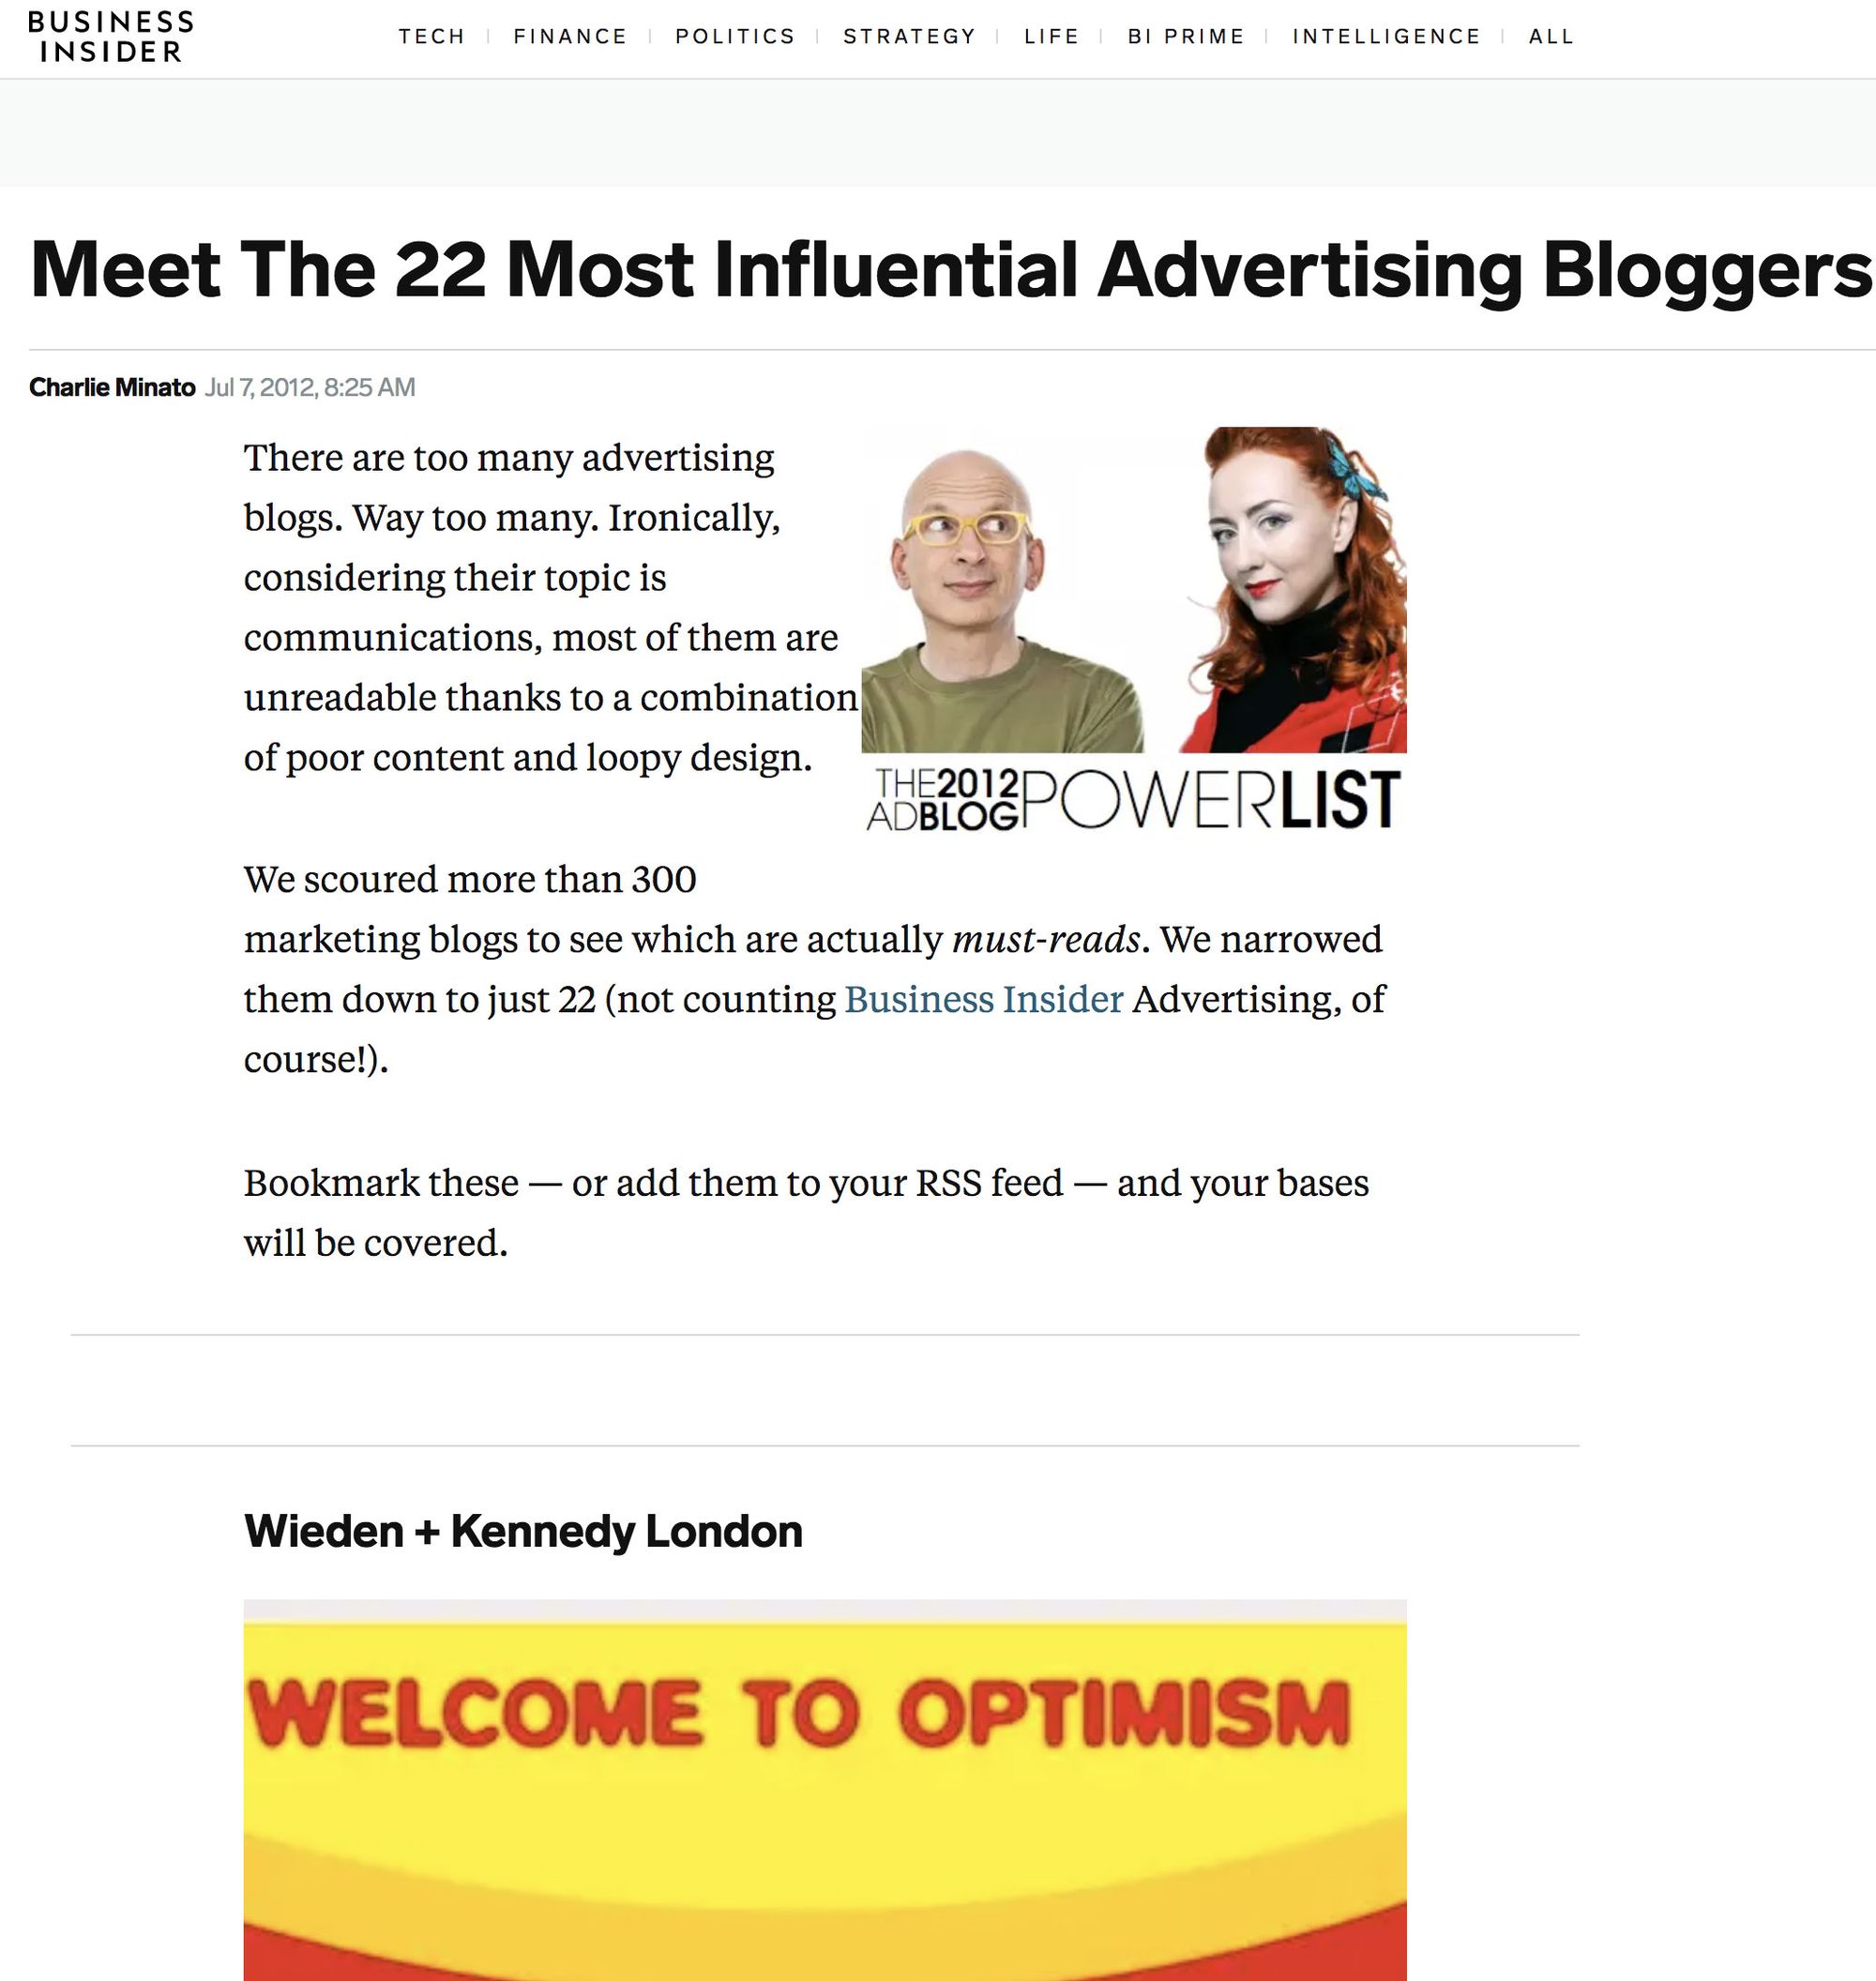 Meet The 22 Most Influential Advertising Bloggers